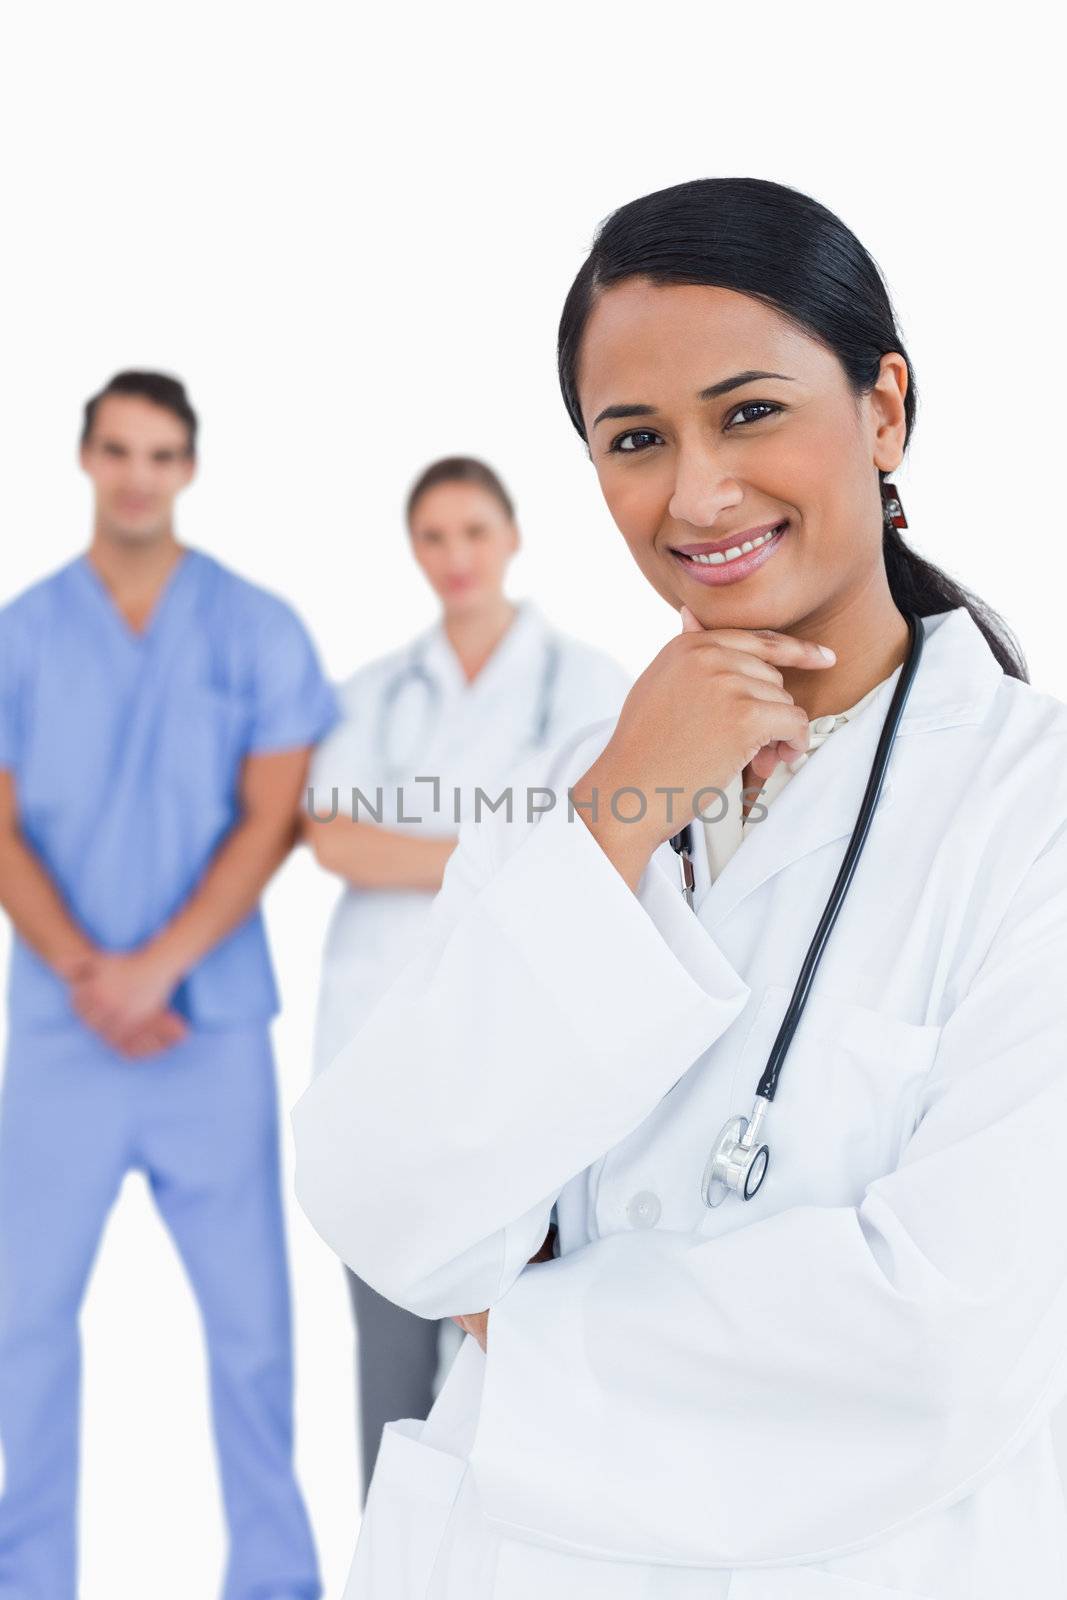 Smiling doctor with staff behind her against a white background